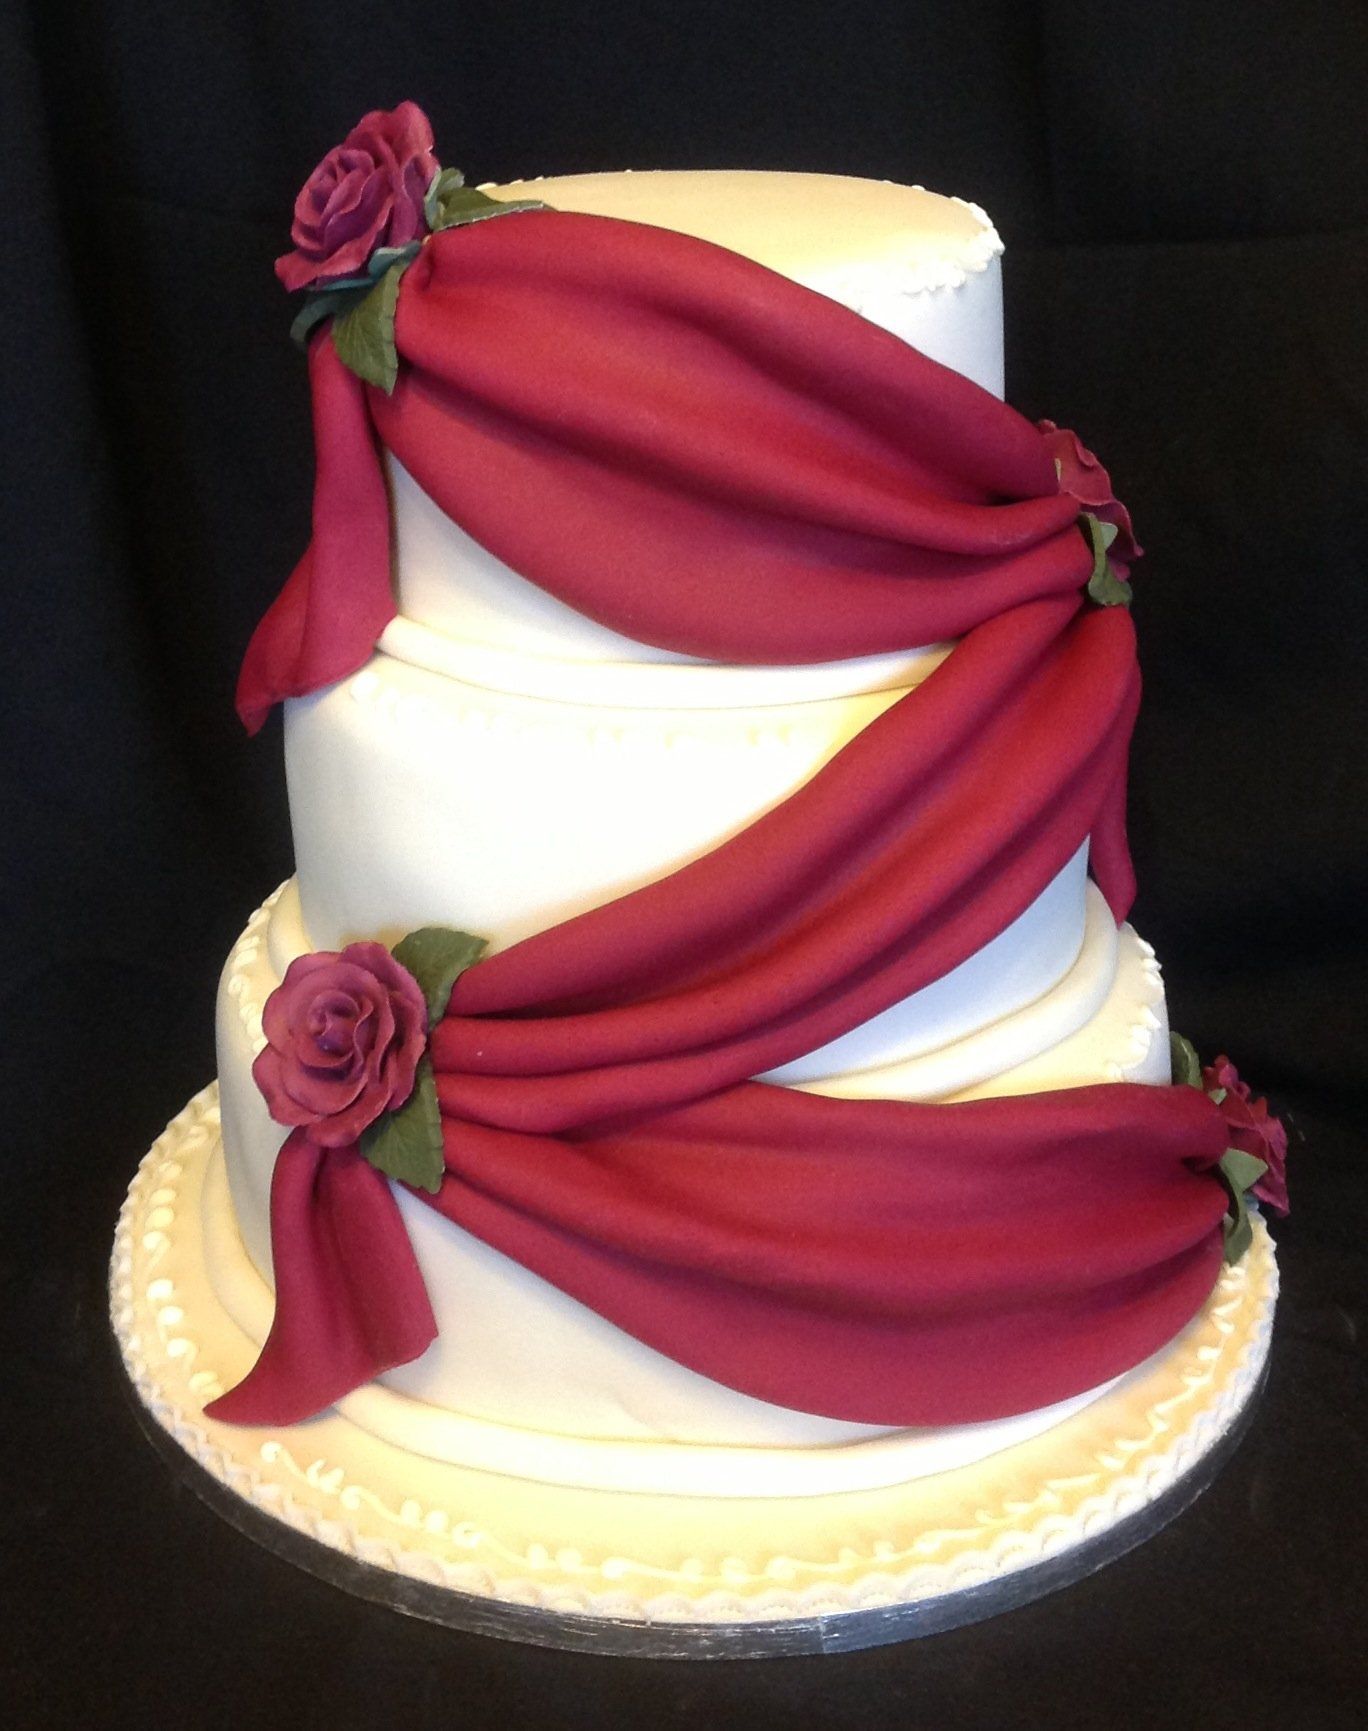 3 tier cake with red sash decoration